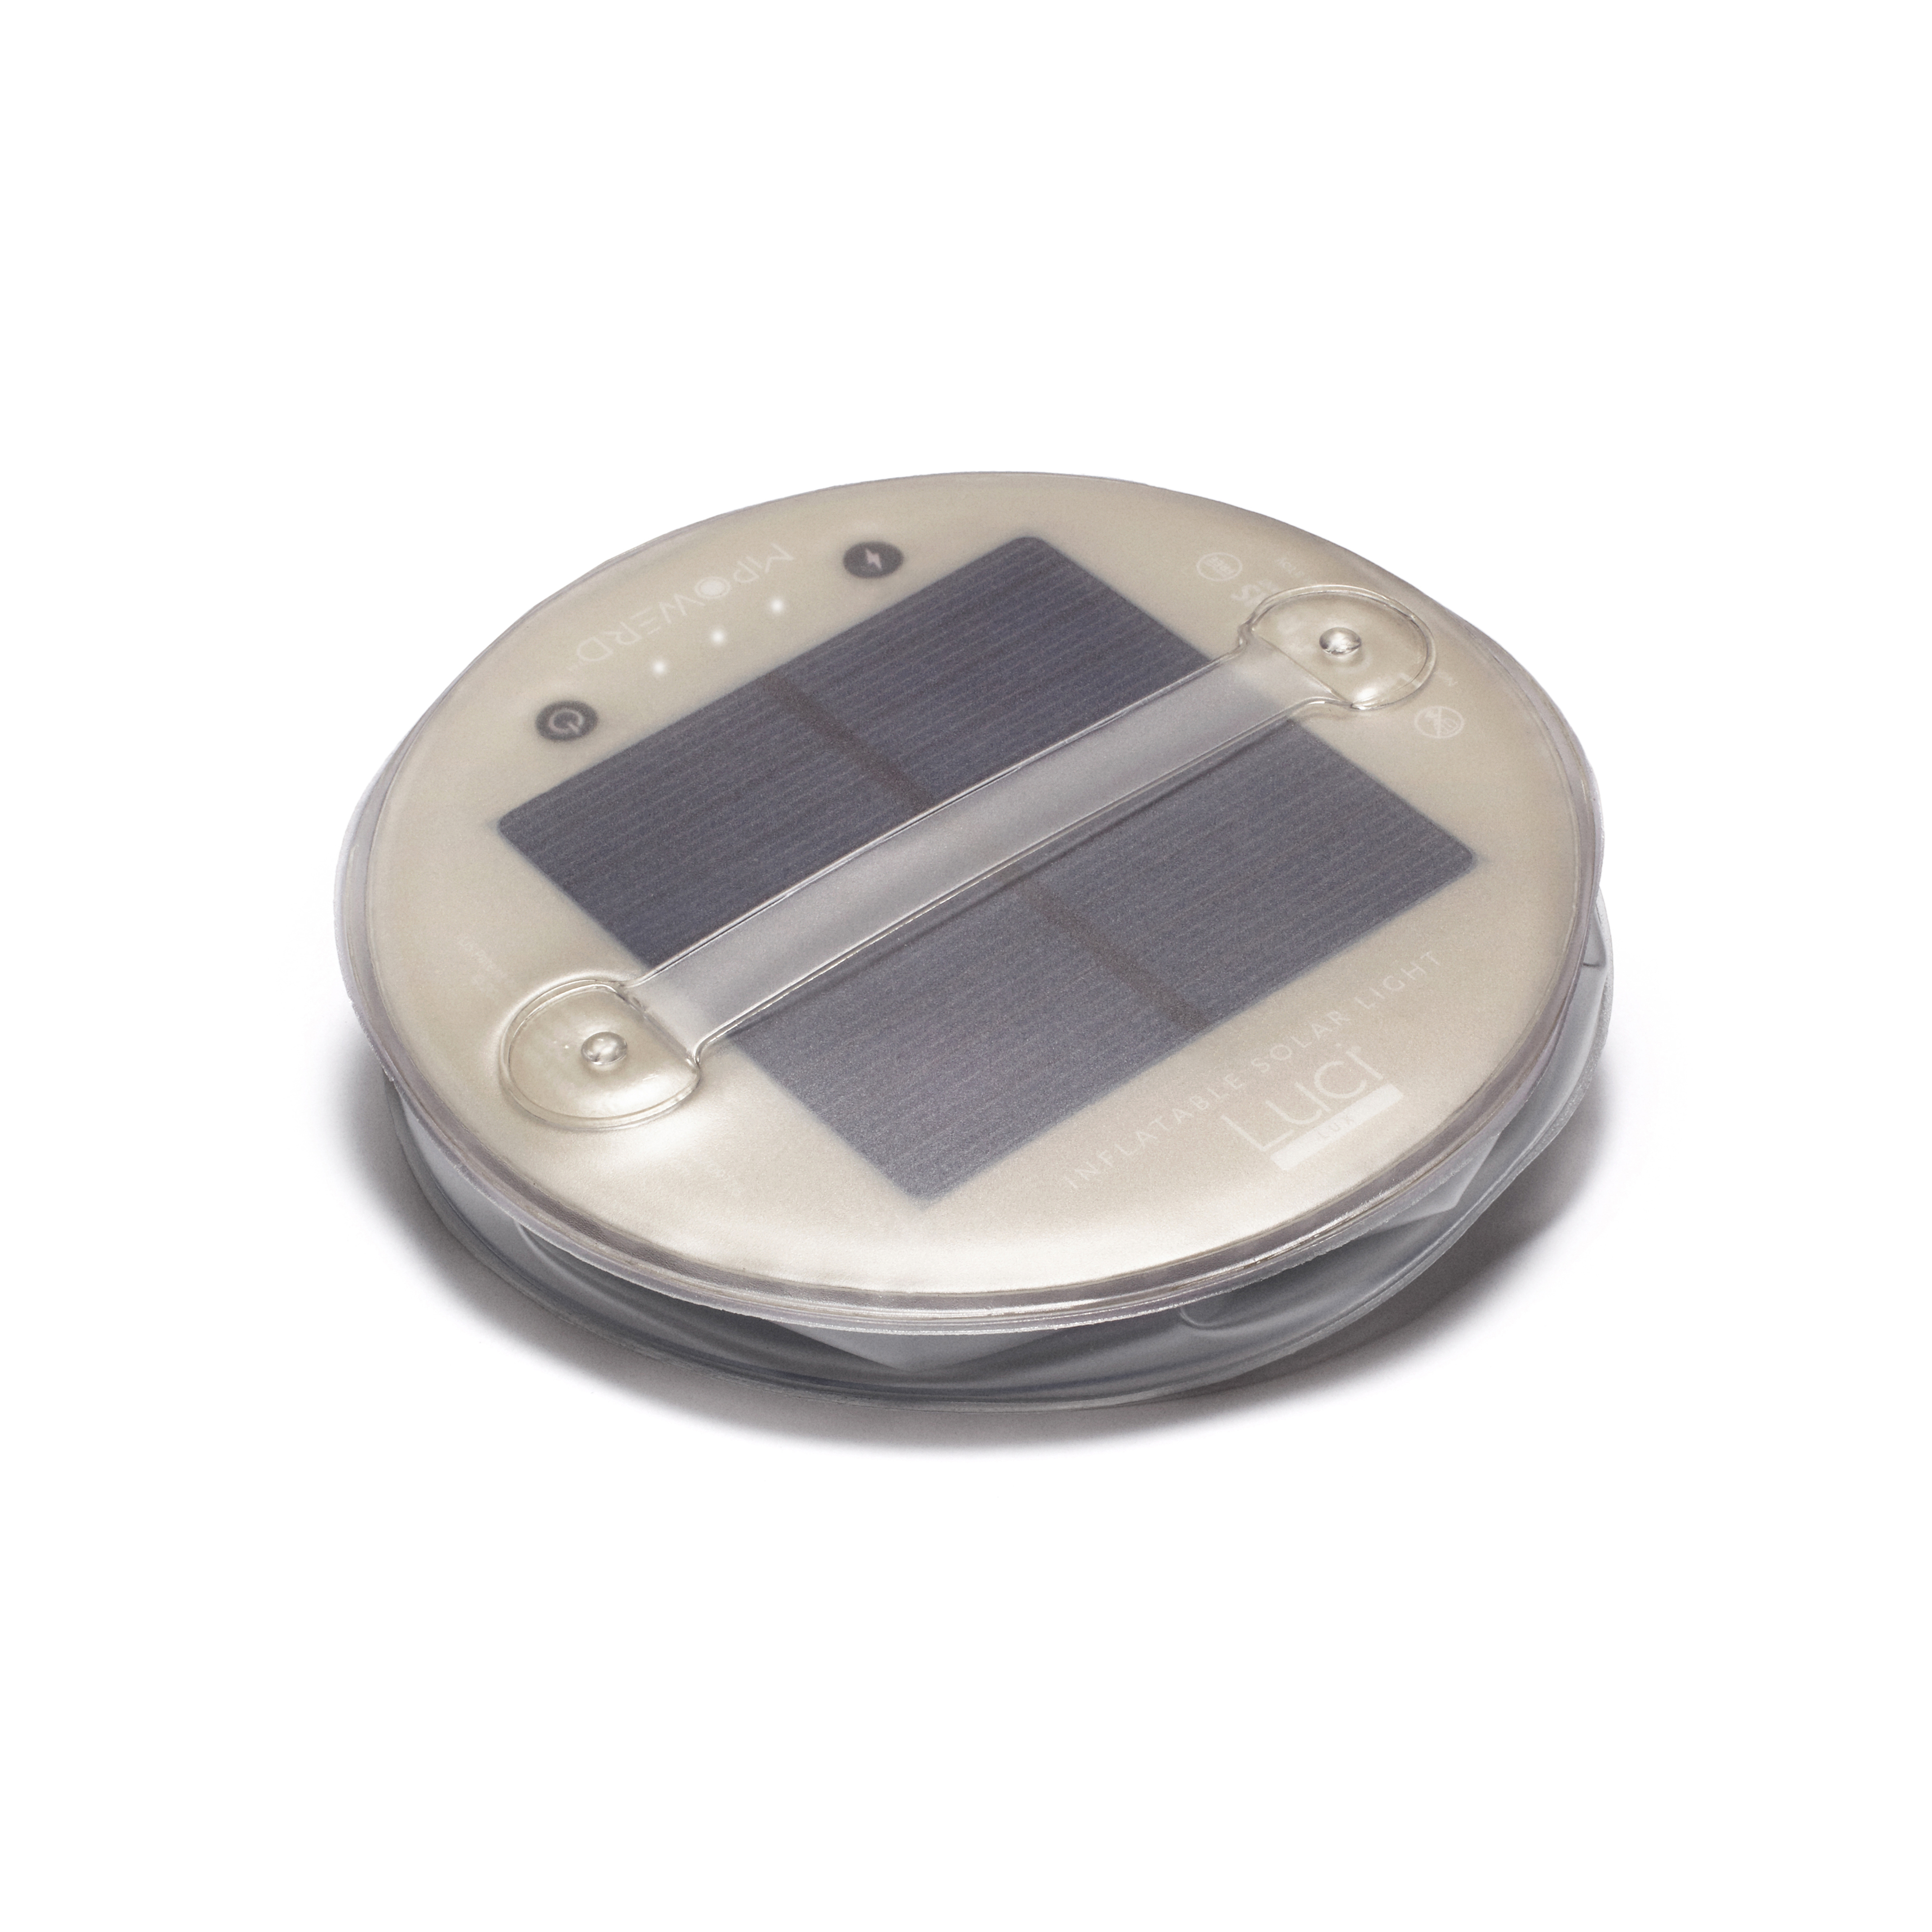 MPOWERED LUCI® Lampe LUX LED Solar